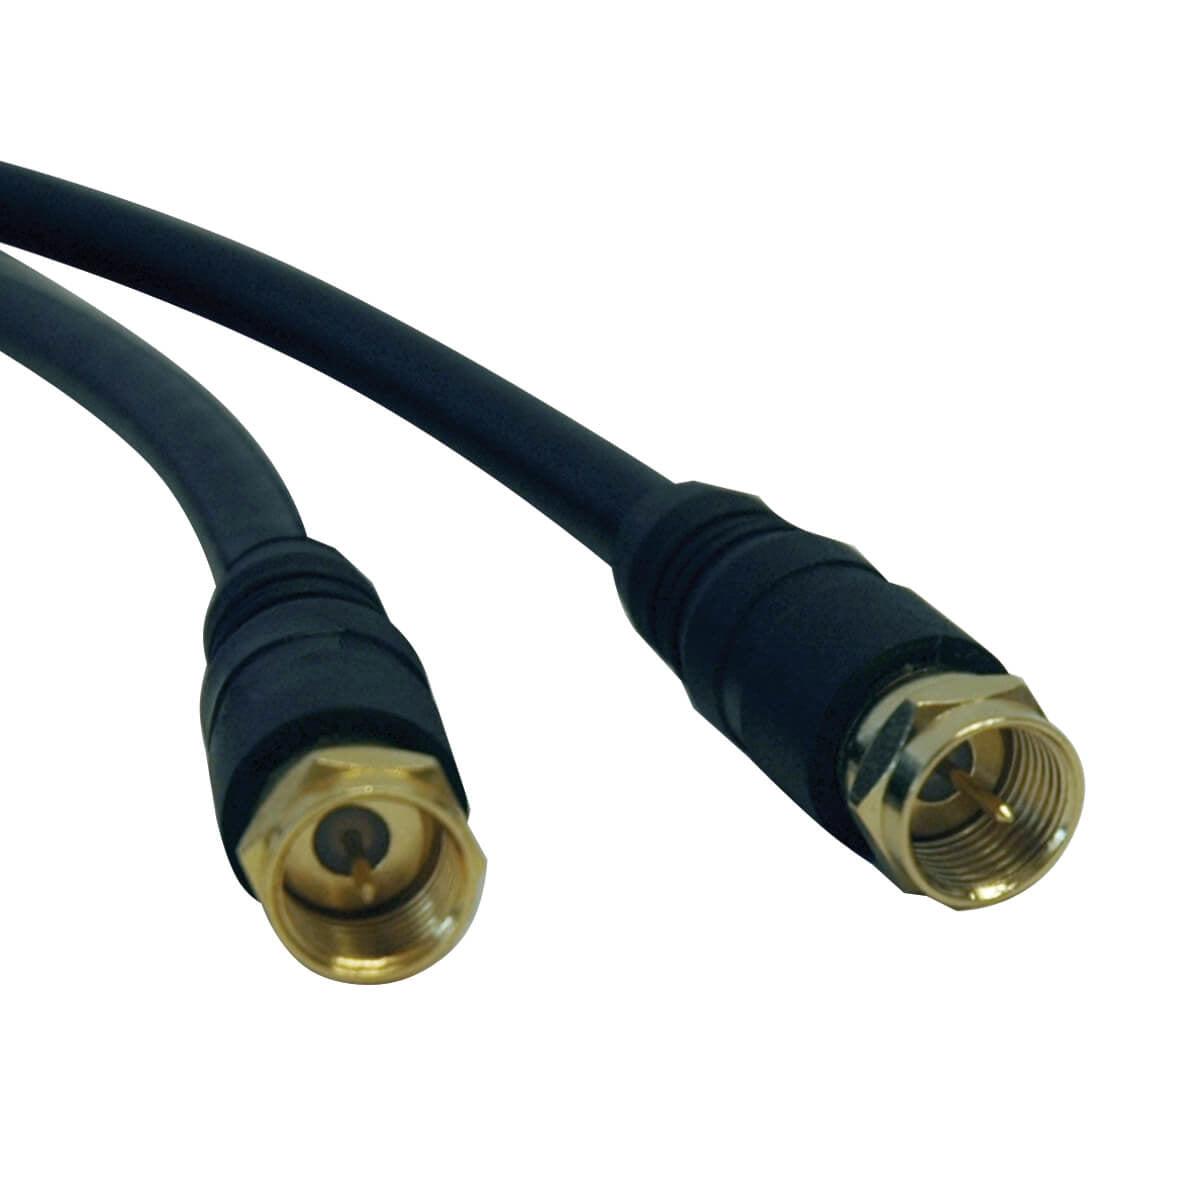 Tripp Lite A200-012 Rg59 Coax Cable With F-Type Connectors, 12 Ft. (3.66 M)